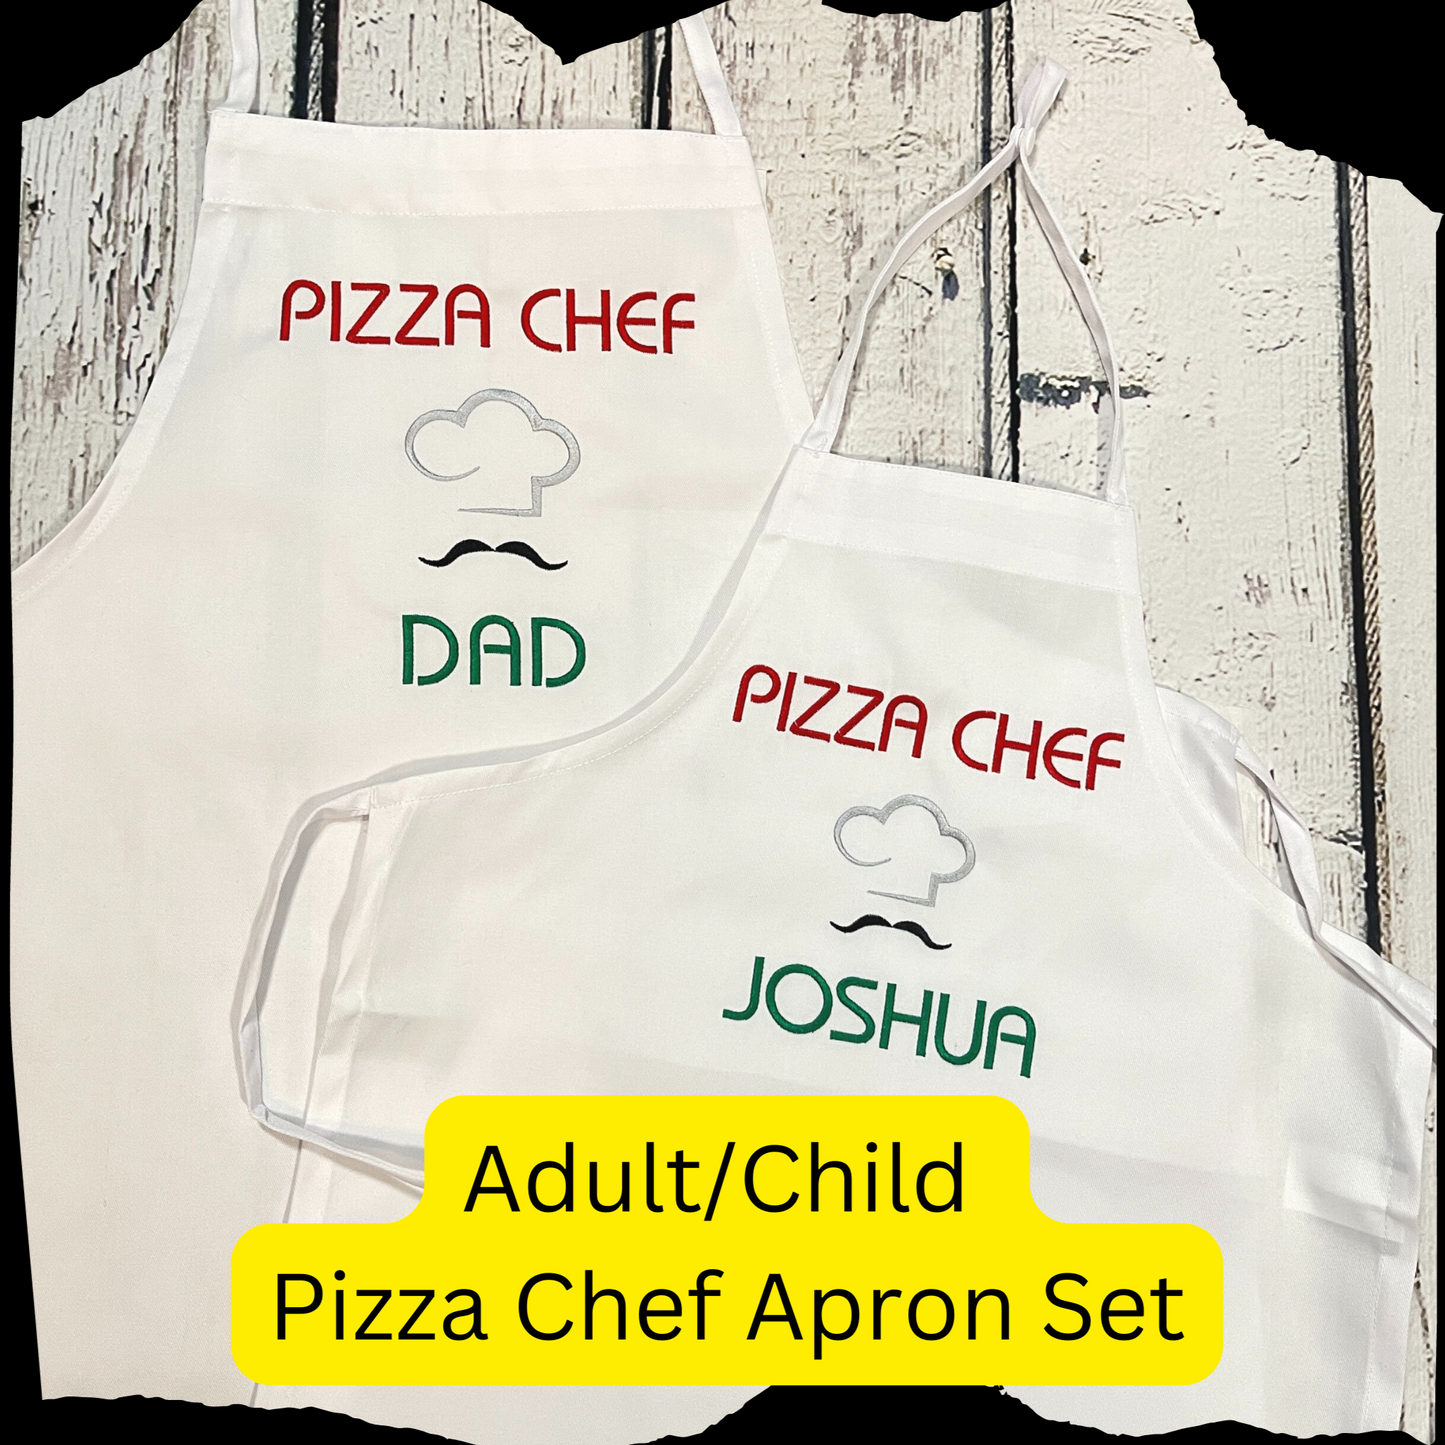 Pizza chef adult and child aprons with names